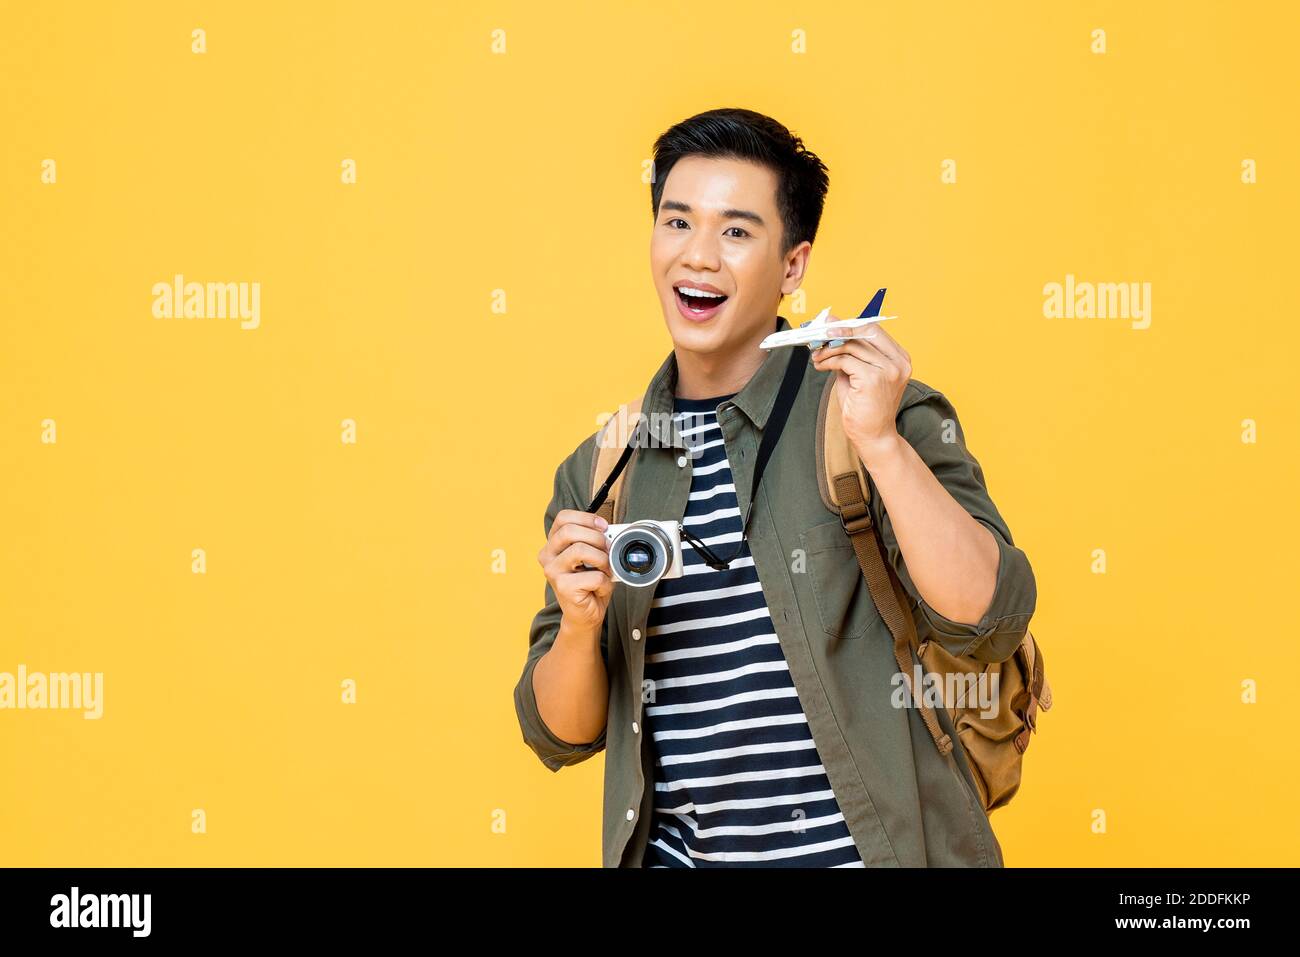 Portrait of young handsome smiling Asian male tourist backpacker holding plane model and camera isolated on studio yellow background Stock Photo